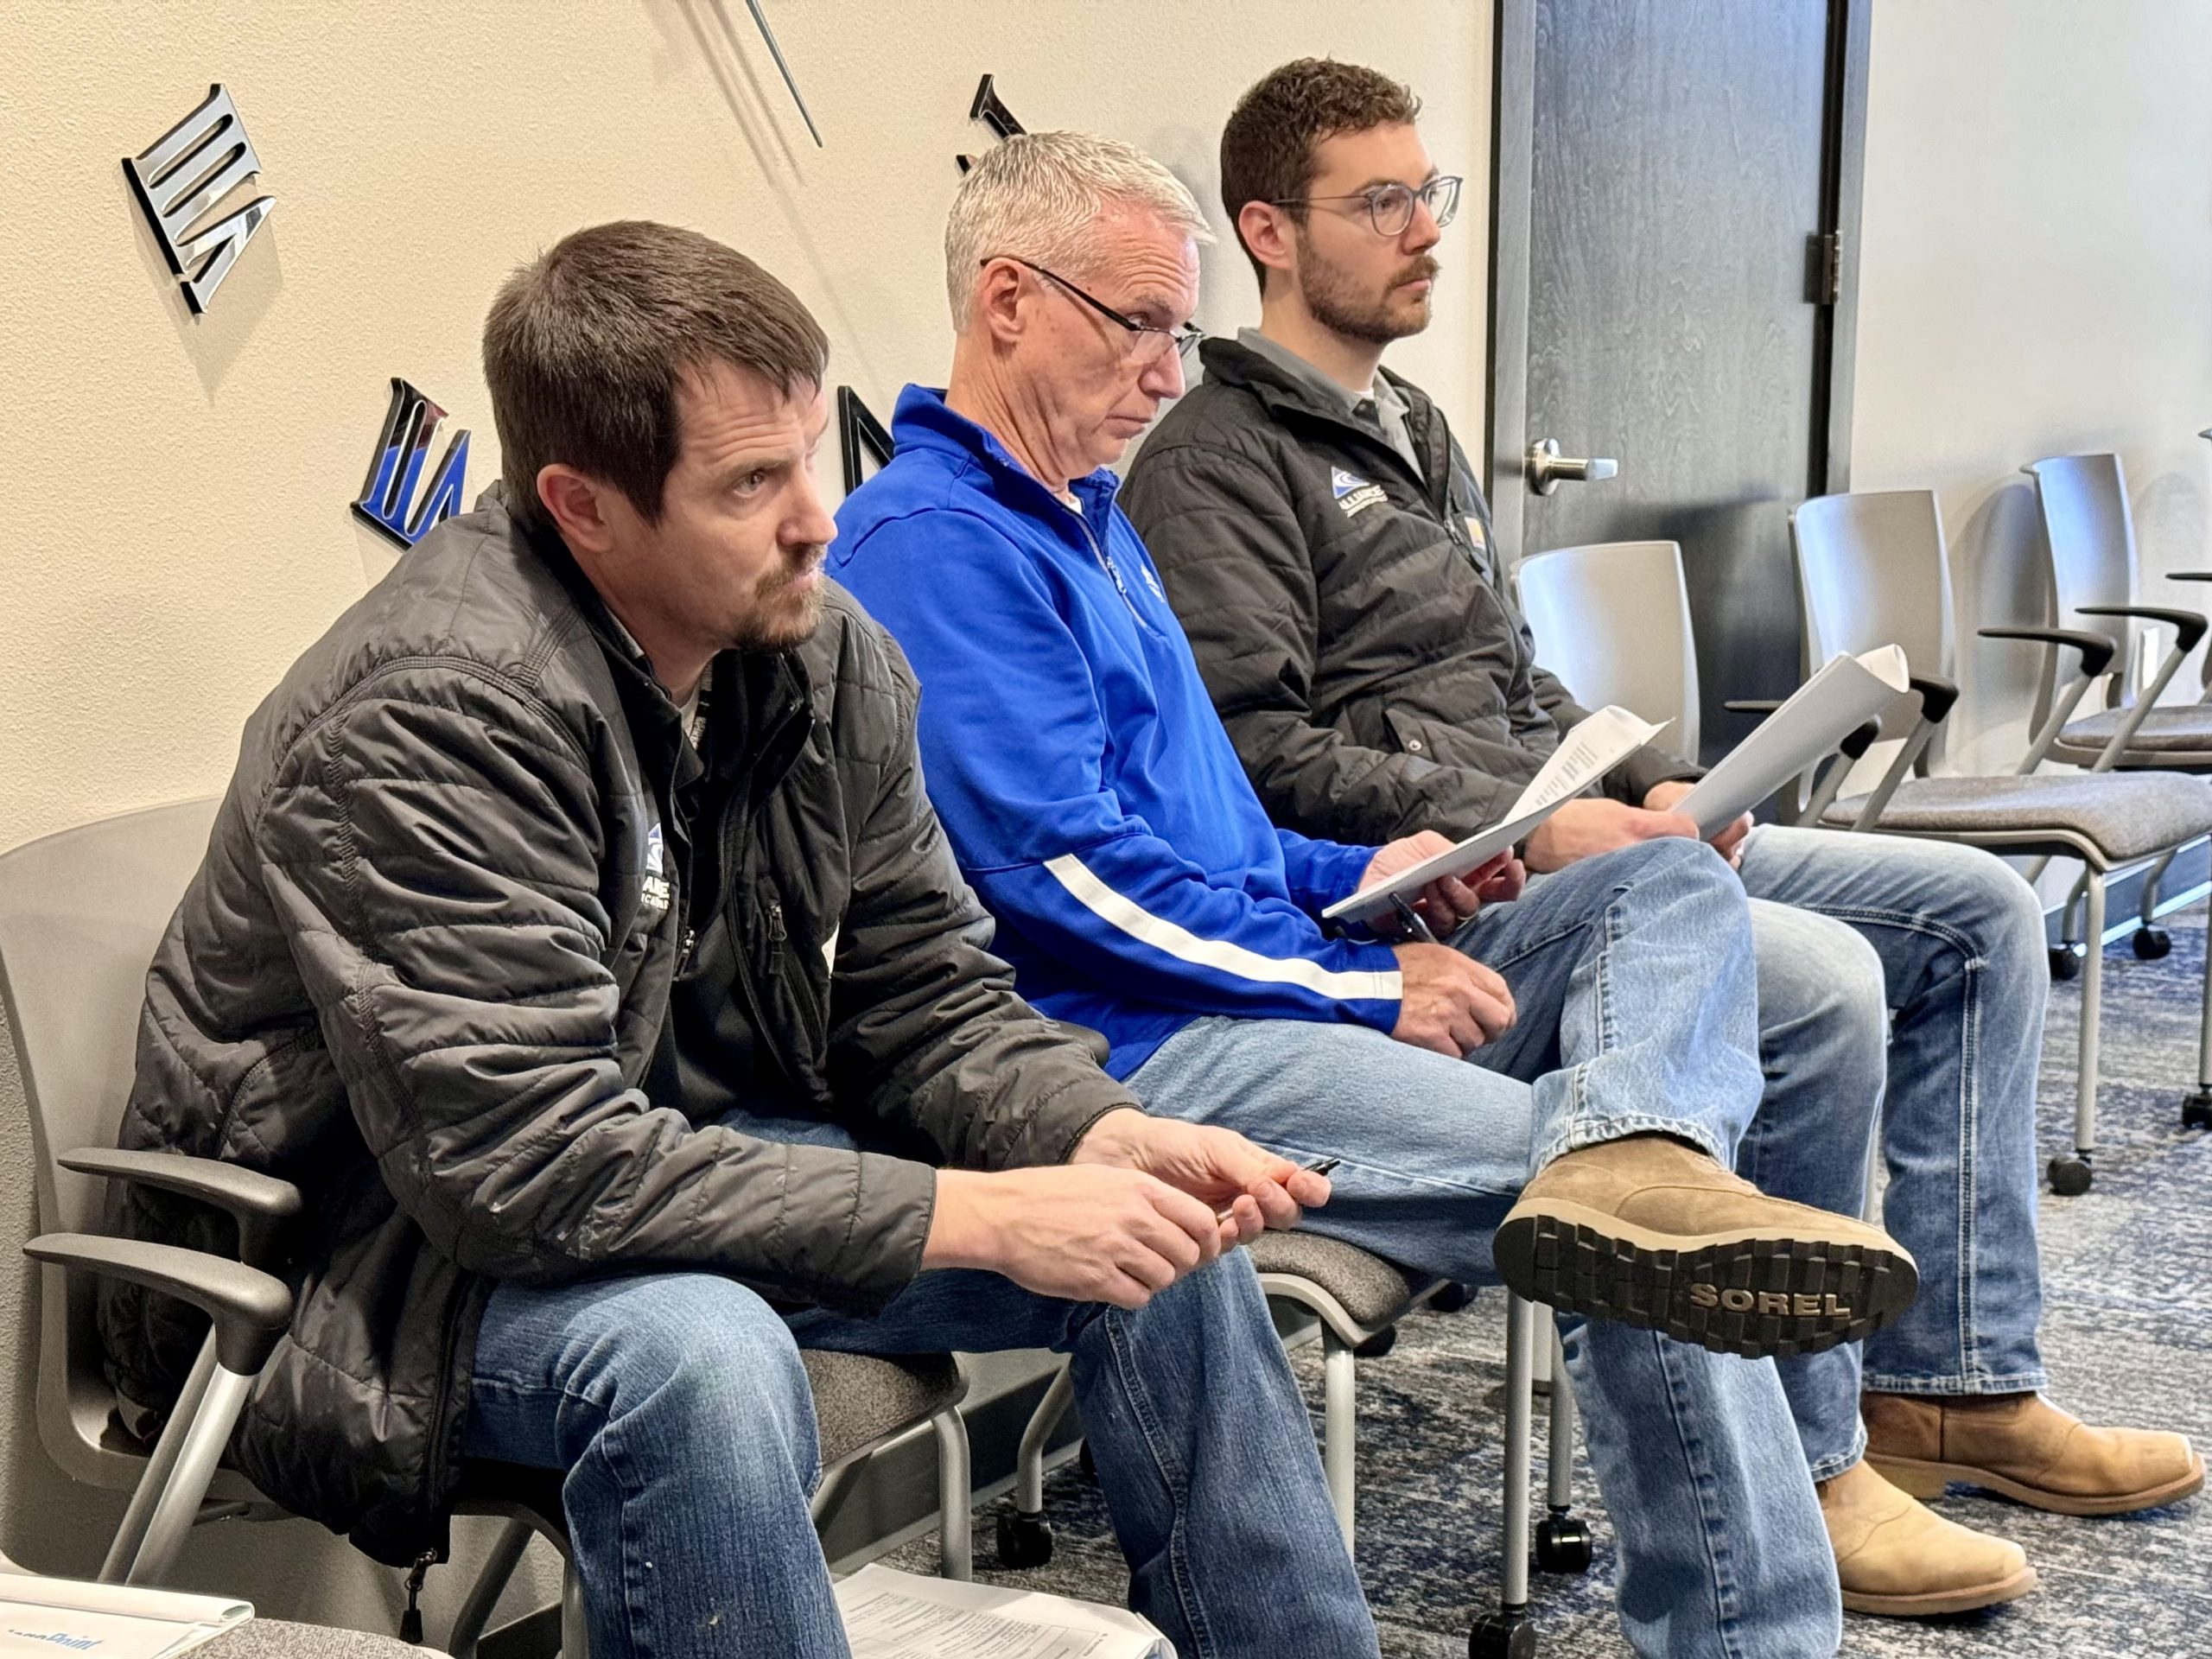 Alliance team members Tom Chase, Jeff Hove, and Charles Lawton listen to contractors review construction plans for rural Beresford's new fiber network.